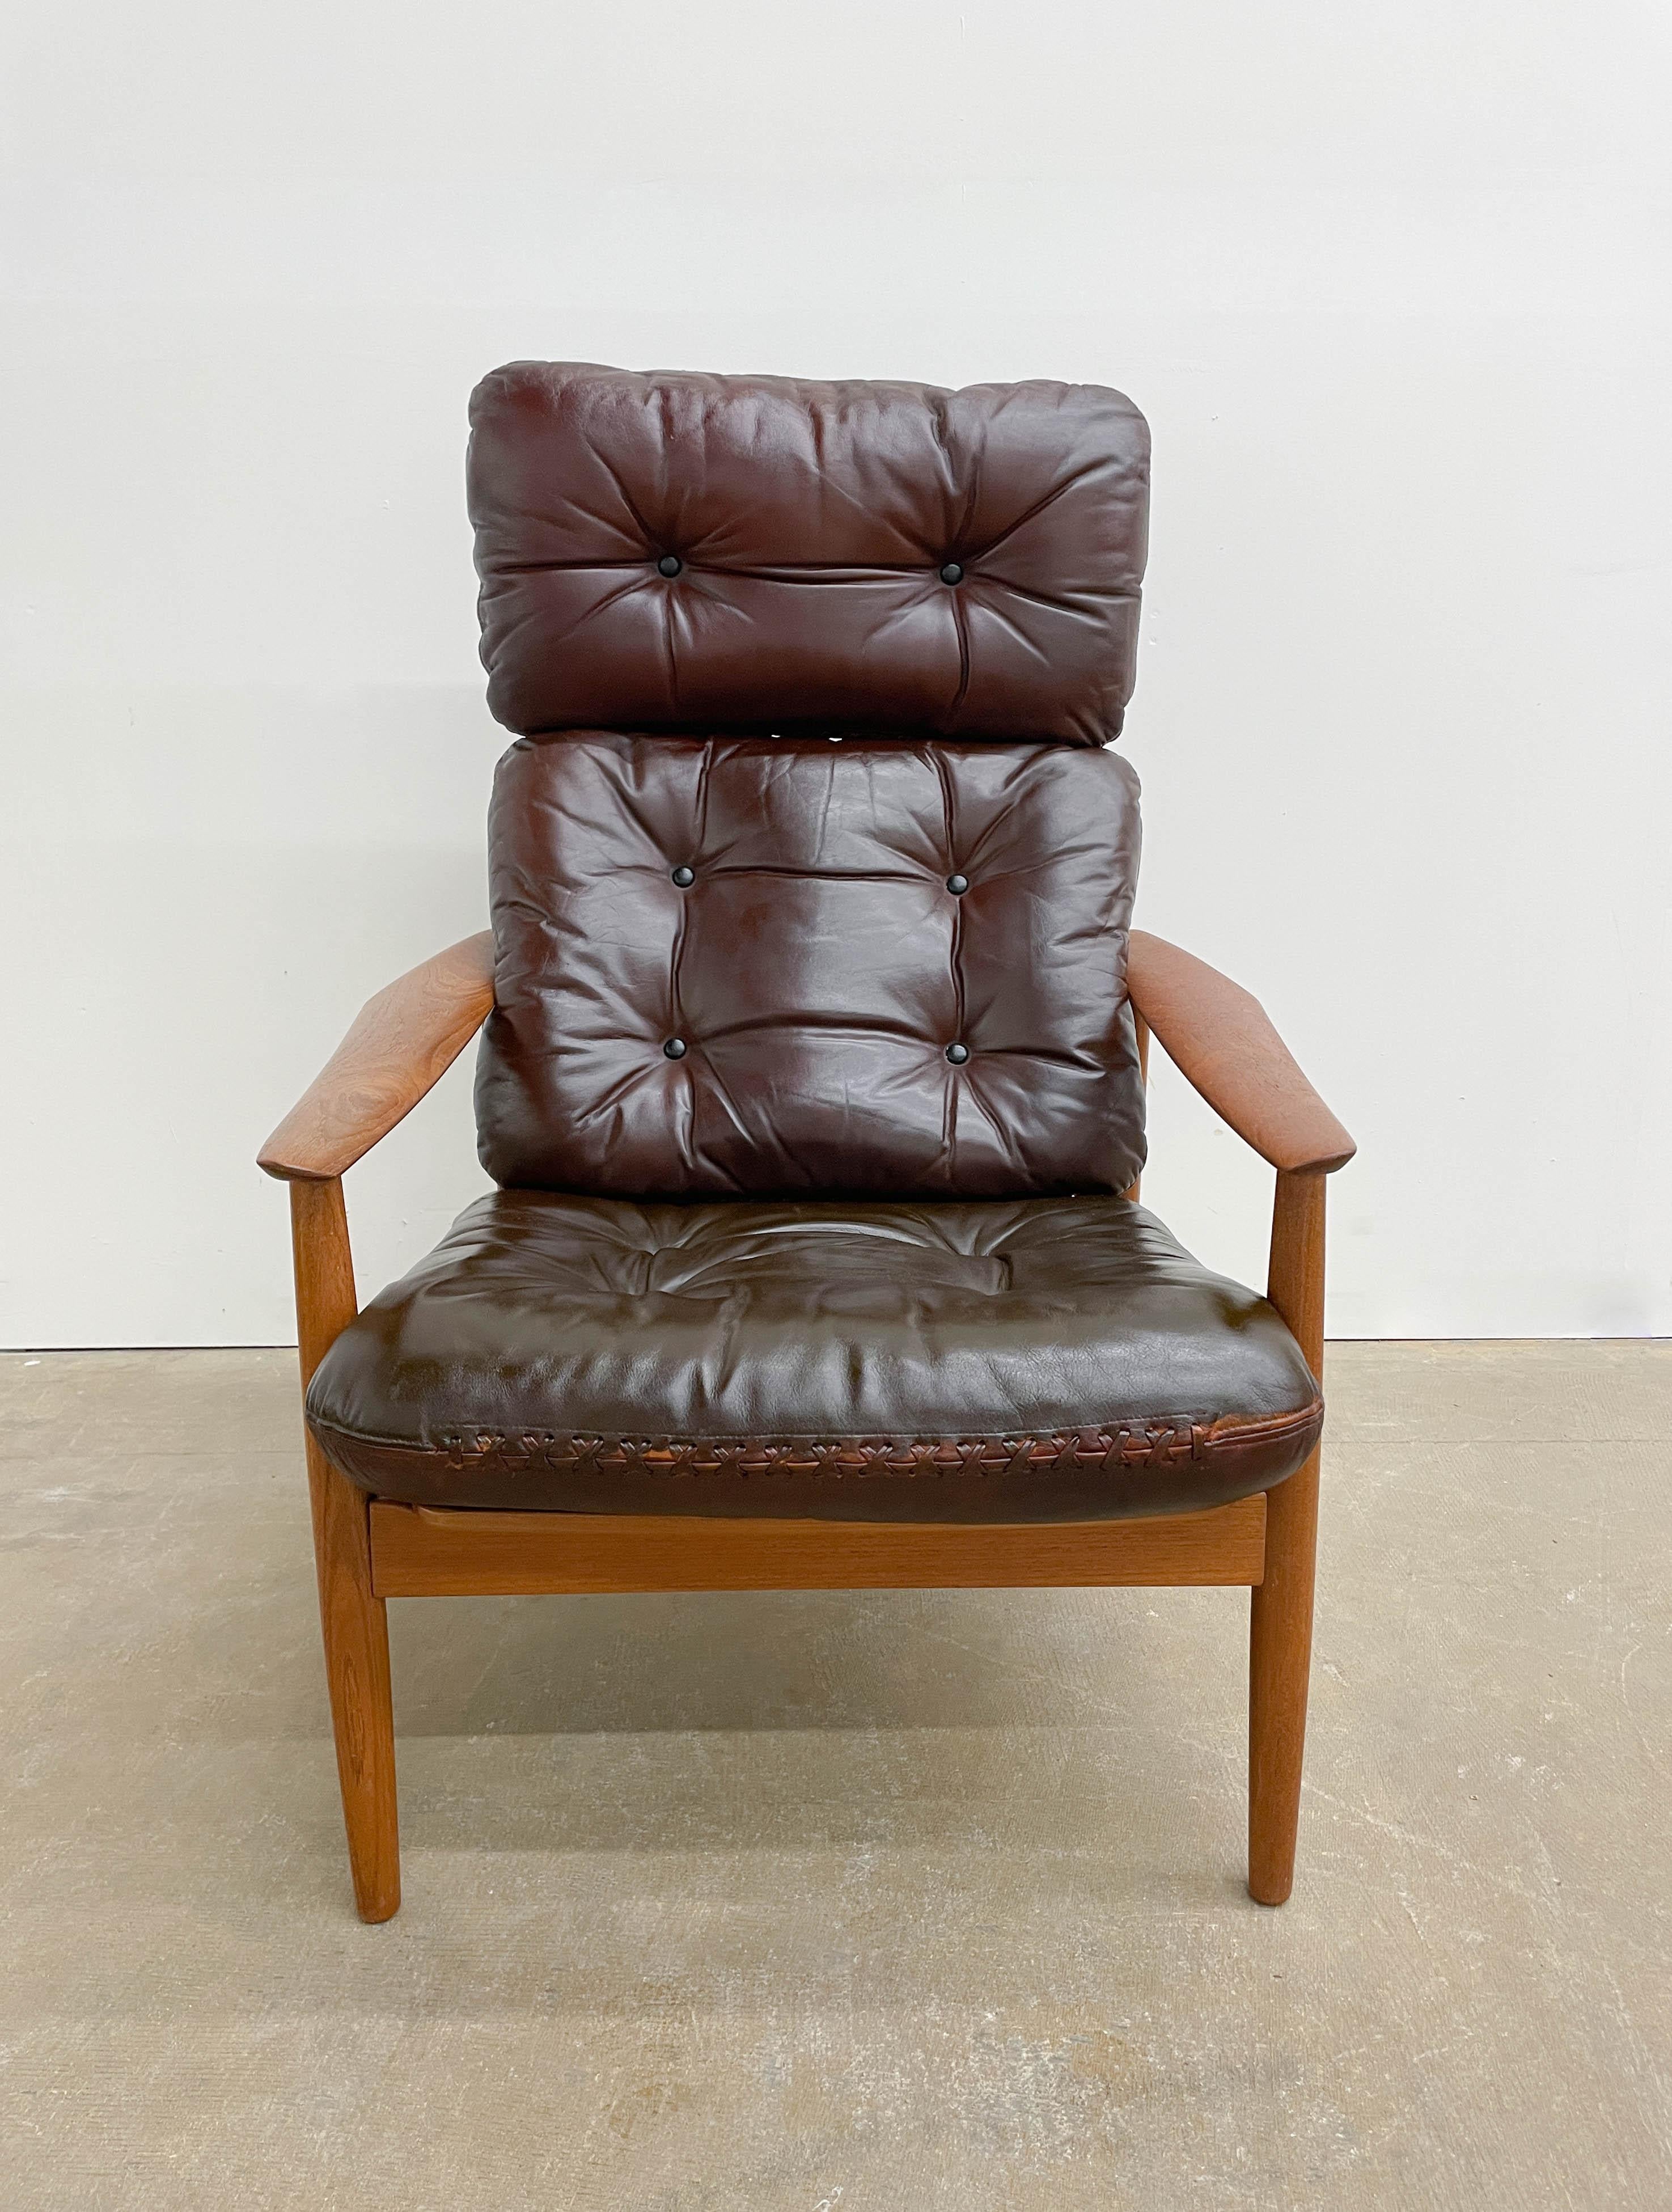 This striking chair design is by Arne Vodder for France and Son in the 1960s. Made in Denmark from solid teak, this broad-armed lounge chair has three different settings of recline, offering superb comfort. The chair's teak frame is in excellent